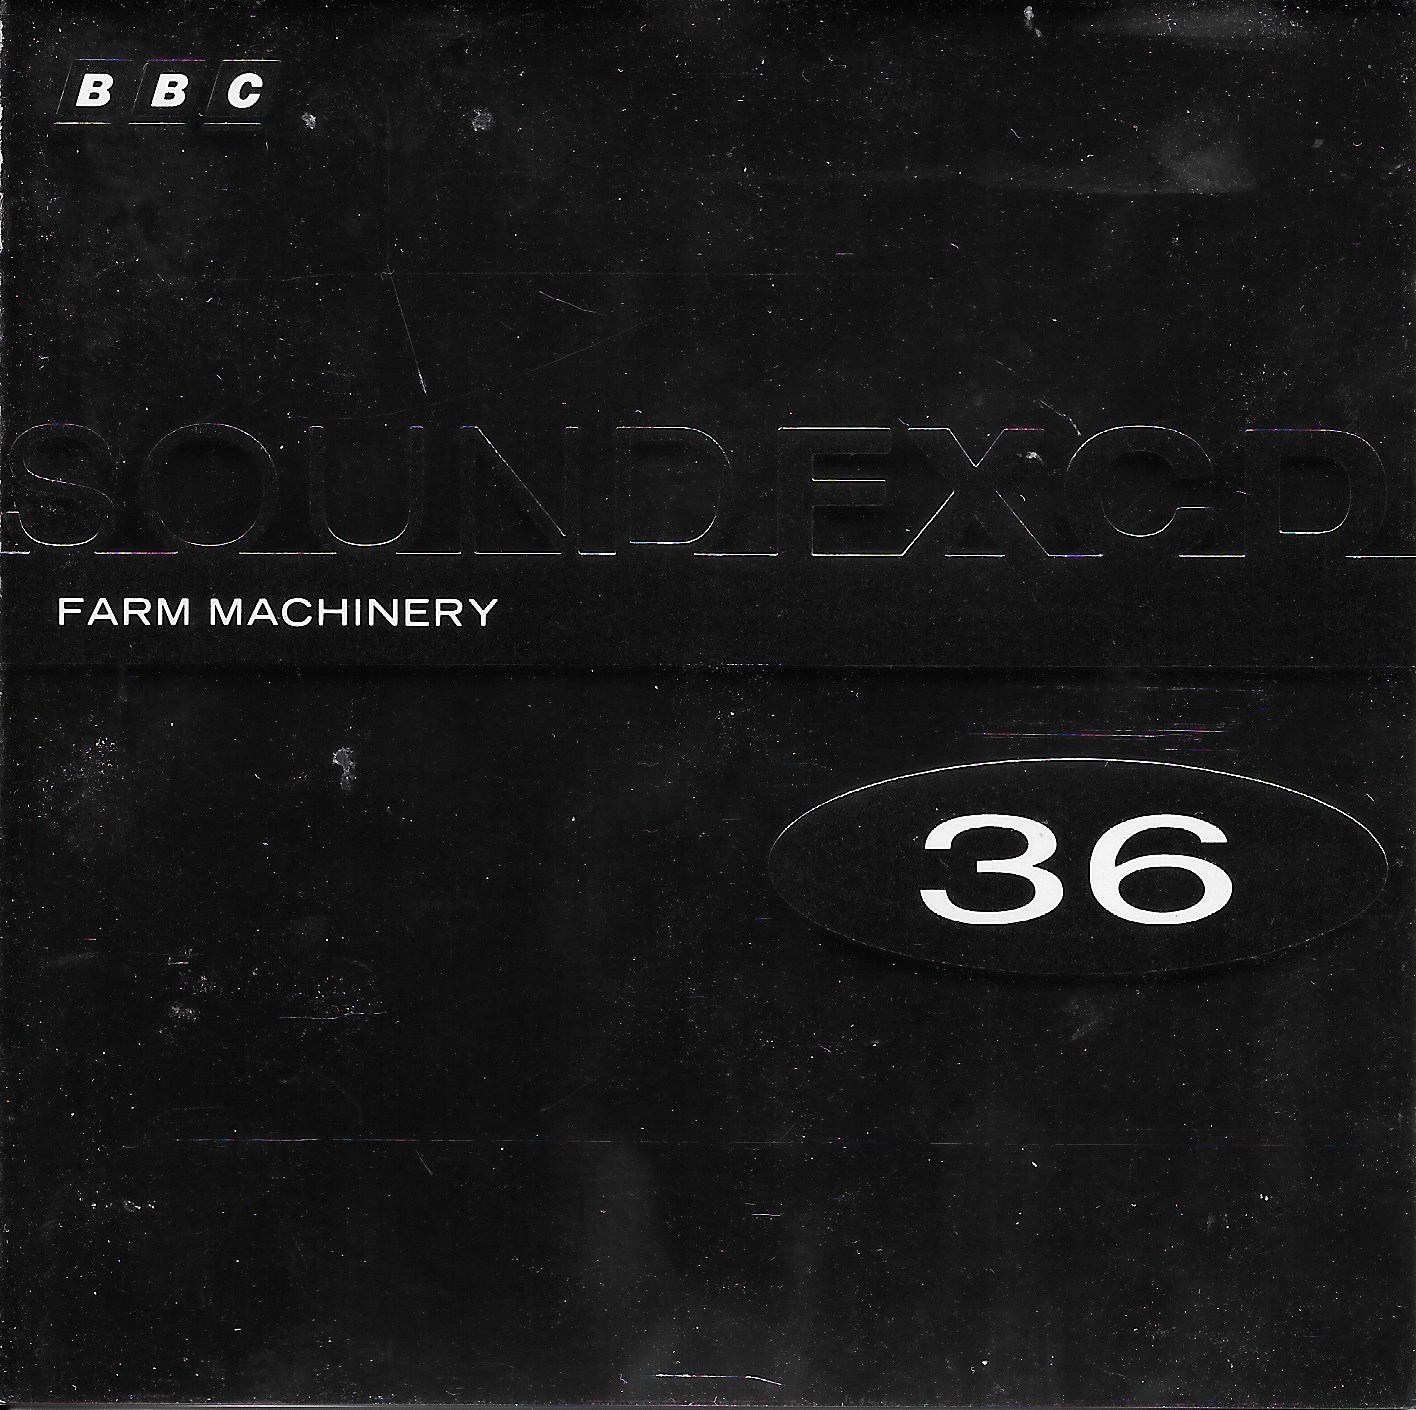 Picture of BBCCD SFX036 Farm machinery by artist Various from the BBC cds - Records and Tapes library